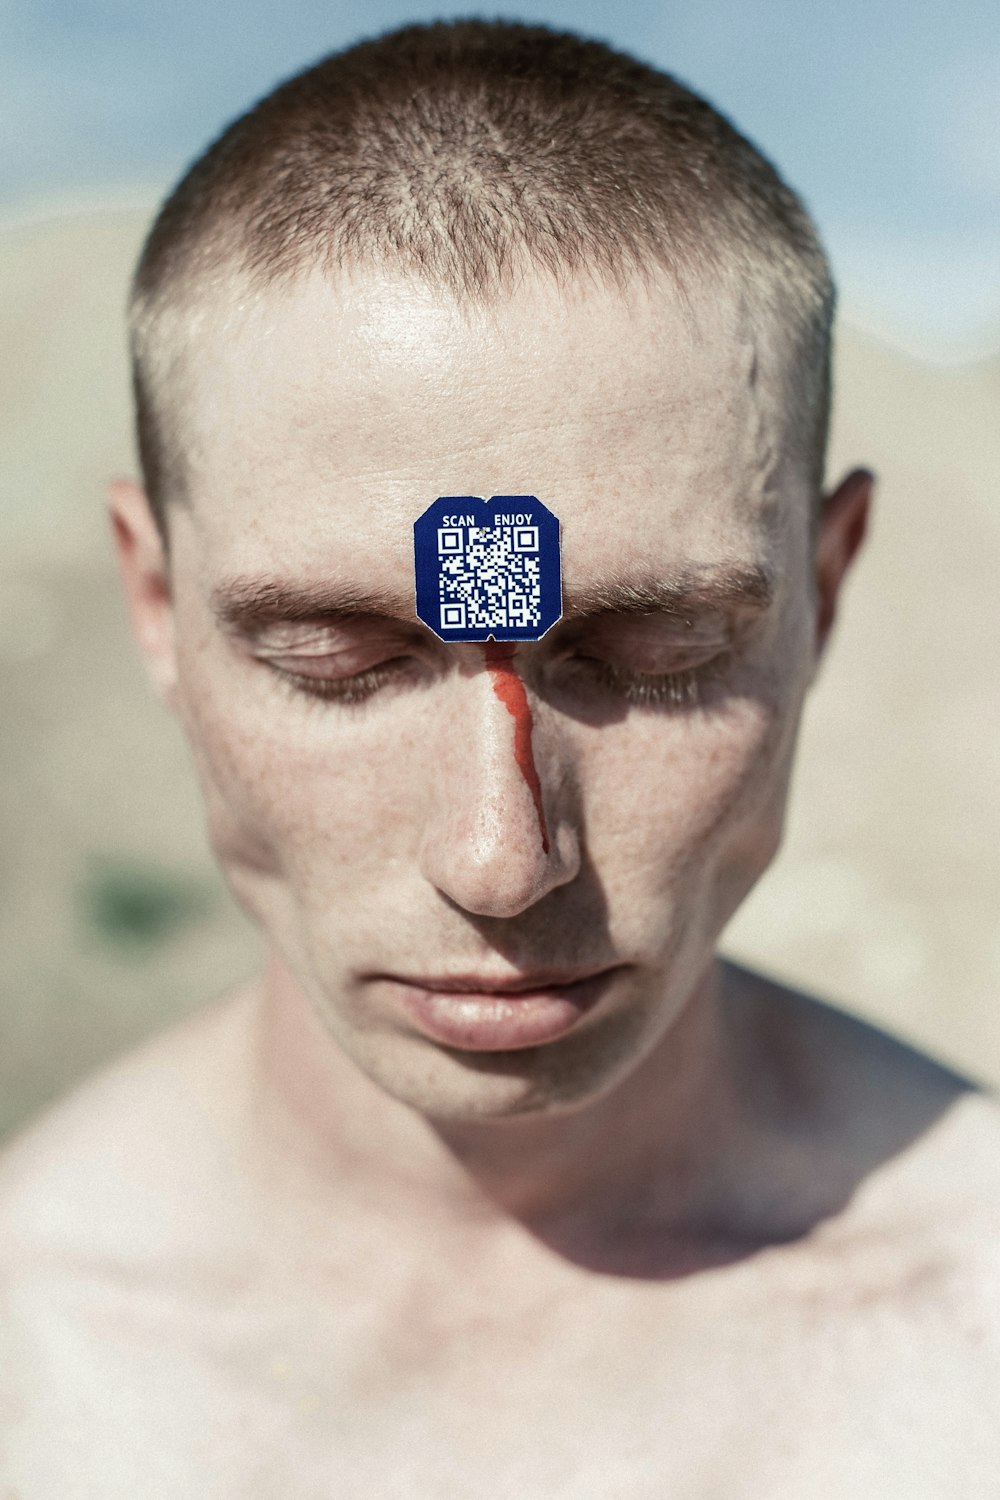 a man with a piece of tape on his forehead